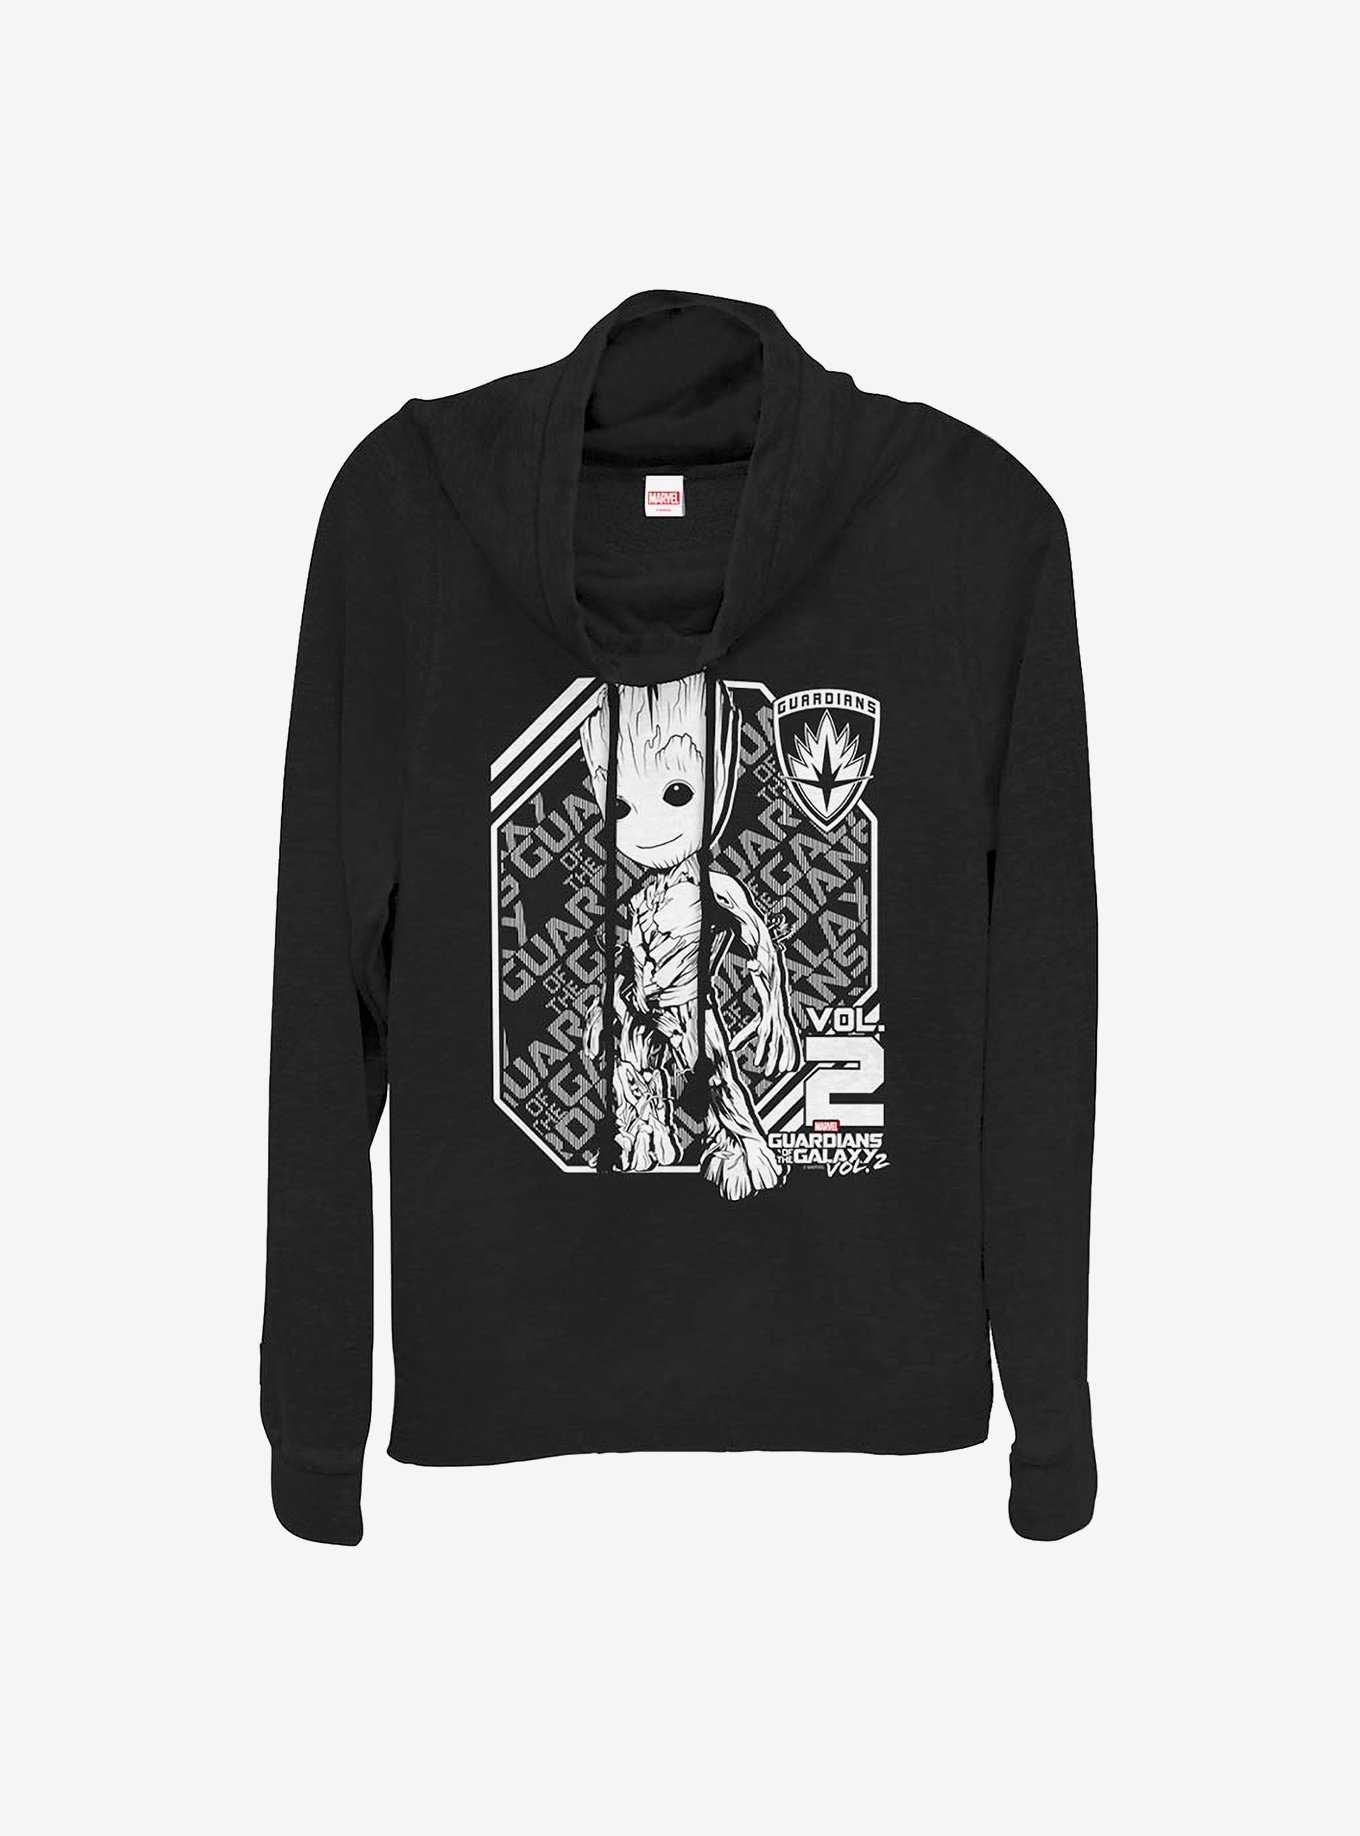 Marvel Guardians Of The Galaxy Groot Volume Two Cowlneck Long-Sleeve Girls Top, , hi-res